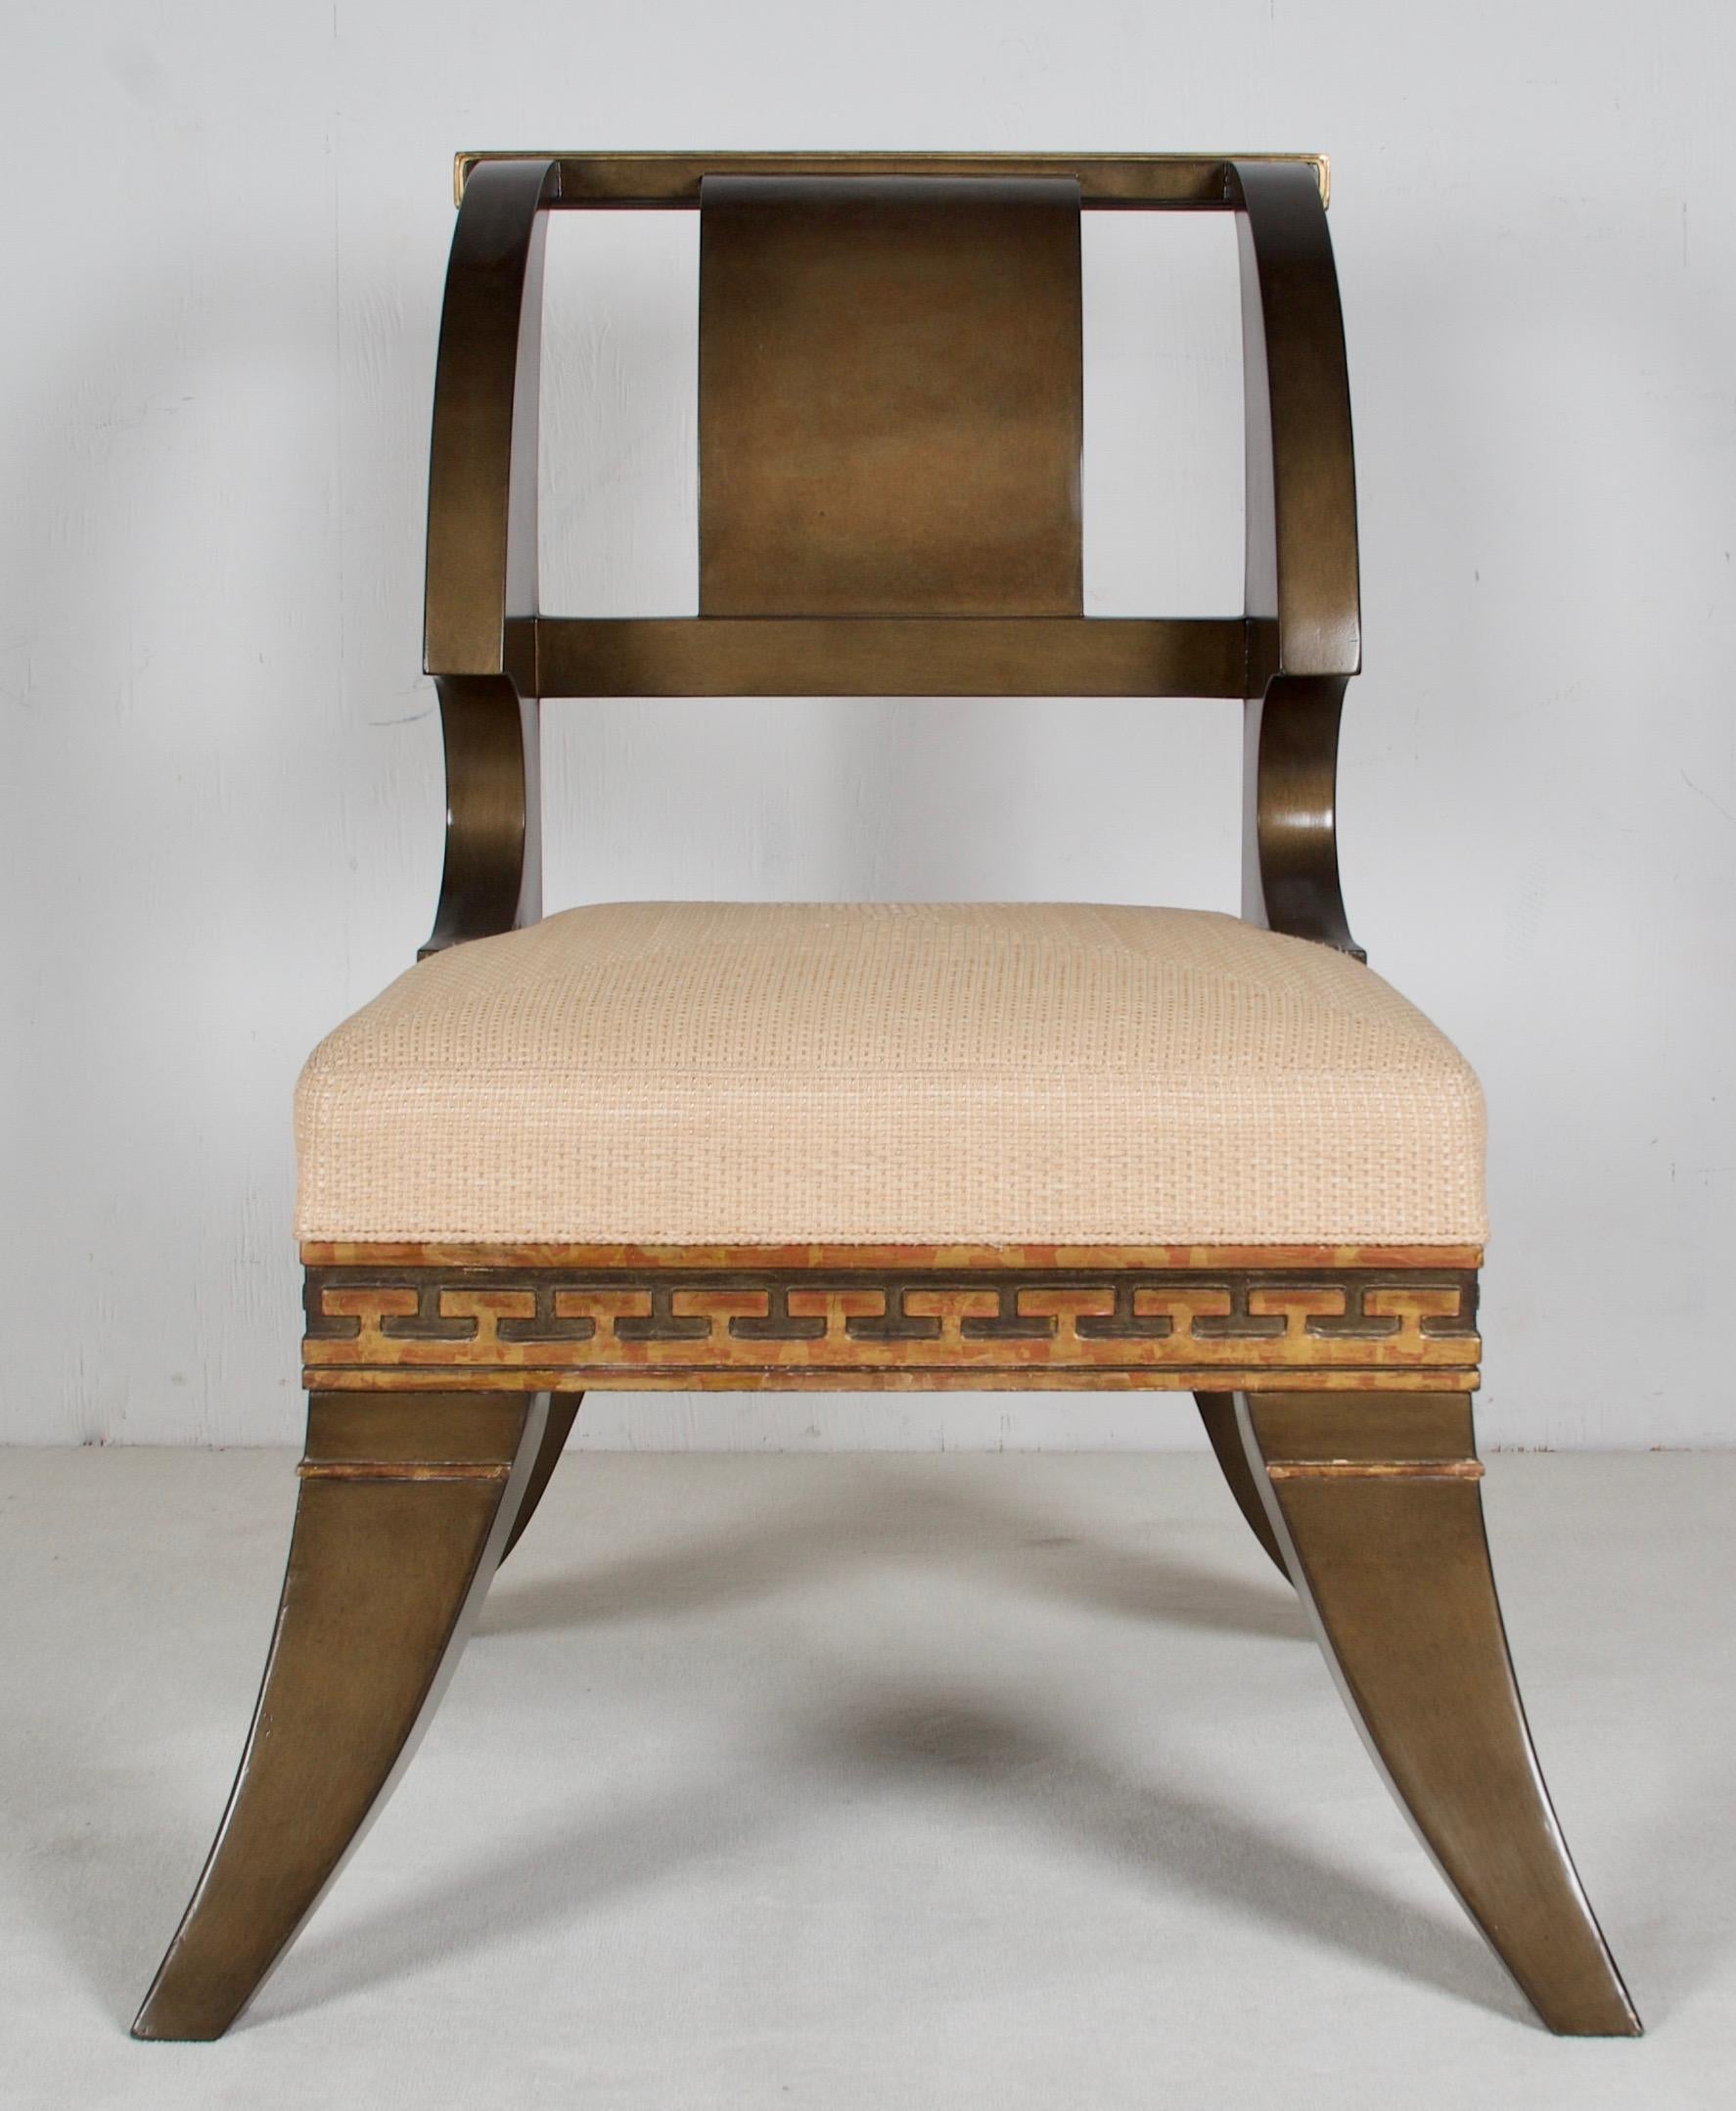 These chairs are after a model and drawings by Thomas Hope, the famous neoclassic designer of the late 18th and early 19th century England. One of his chairs you can find
at the V&A website, another model is homed at the Chicago Art Museum. Both